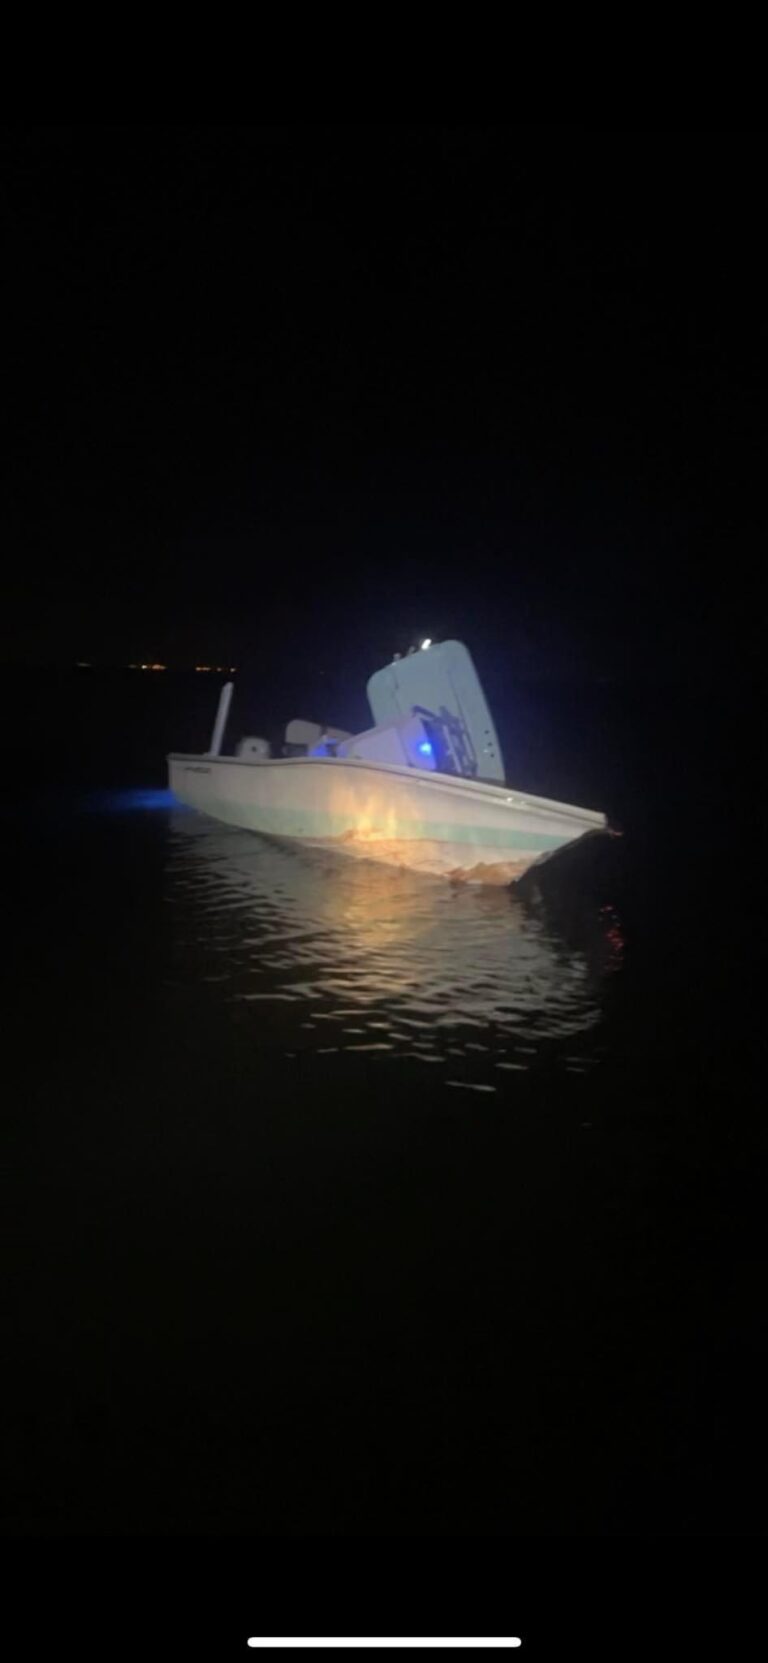 Coast Guard rescues occupants after boat crashes into rocks near St. Petersburg’s Albert Whitted Airport